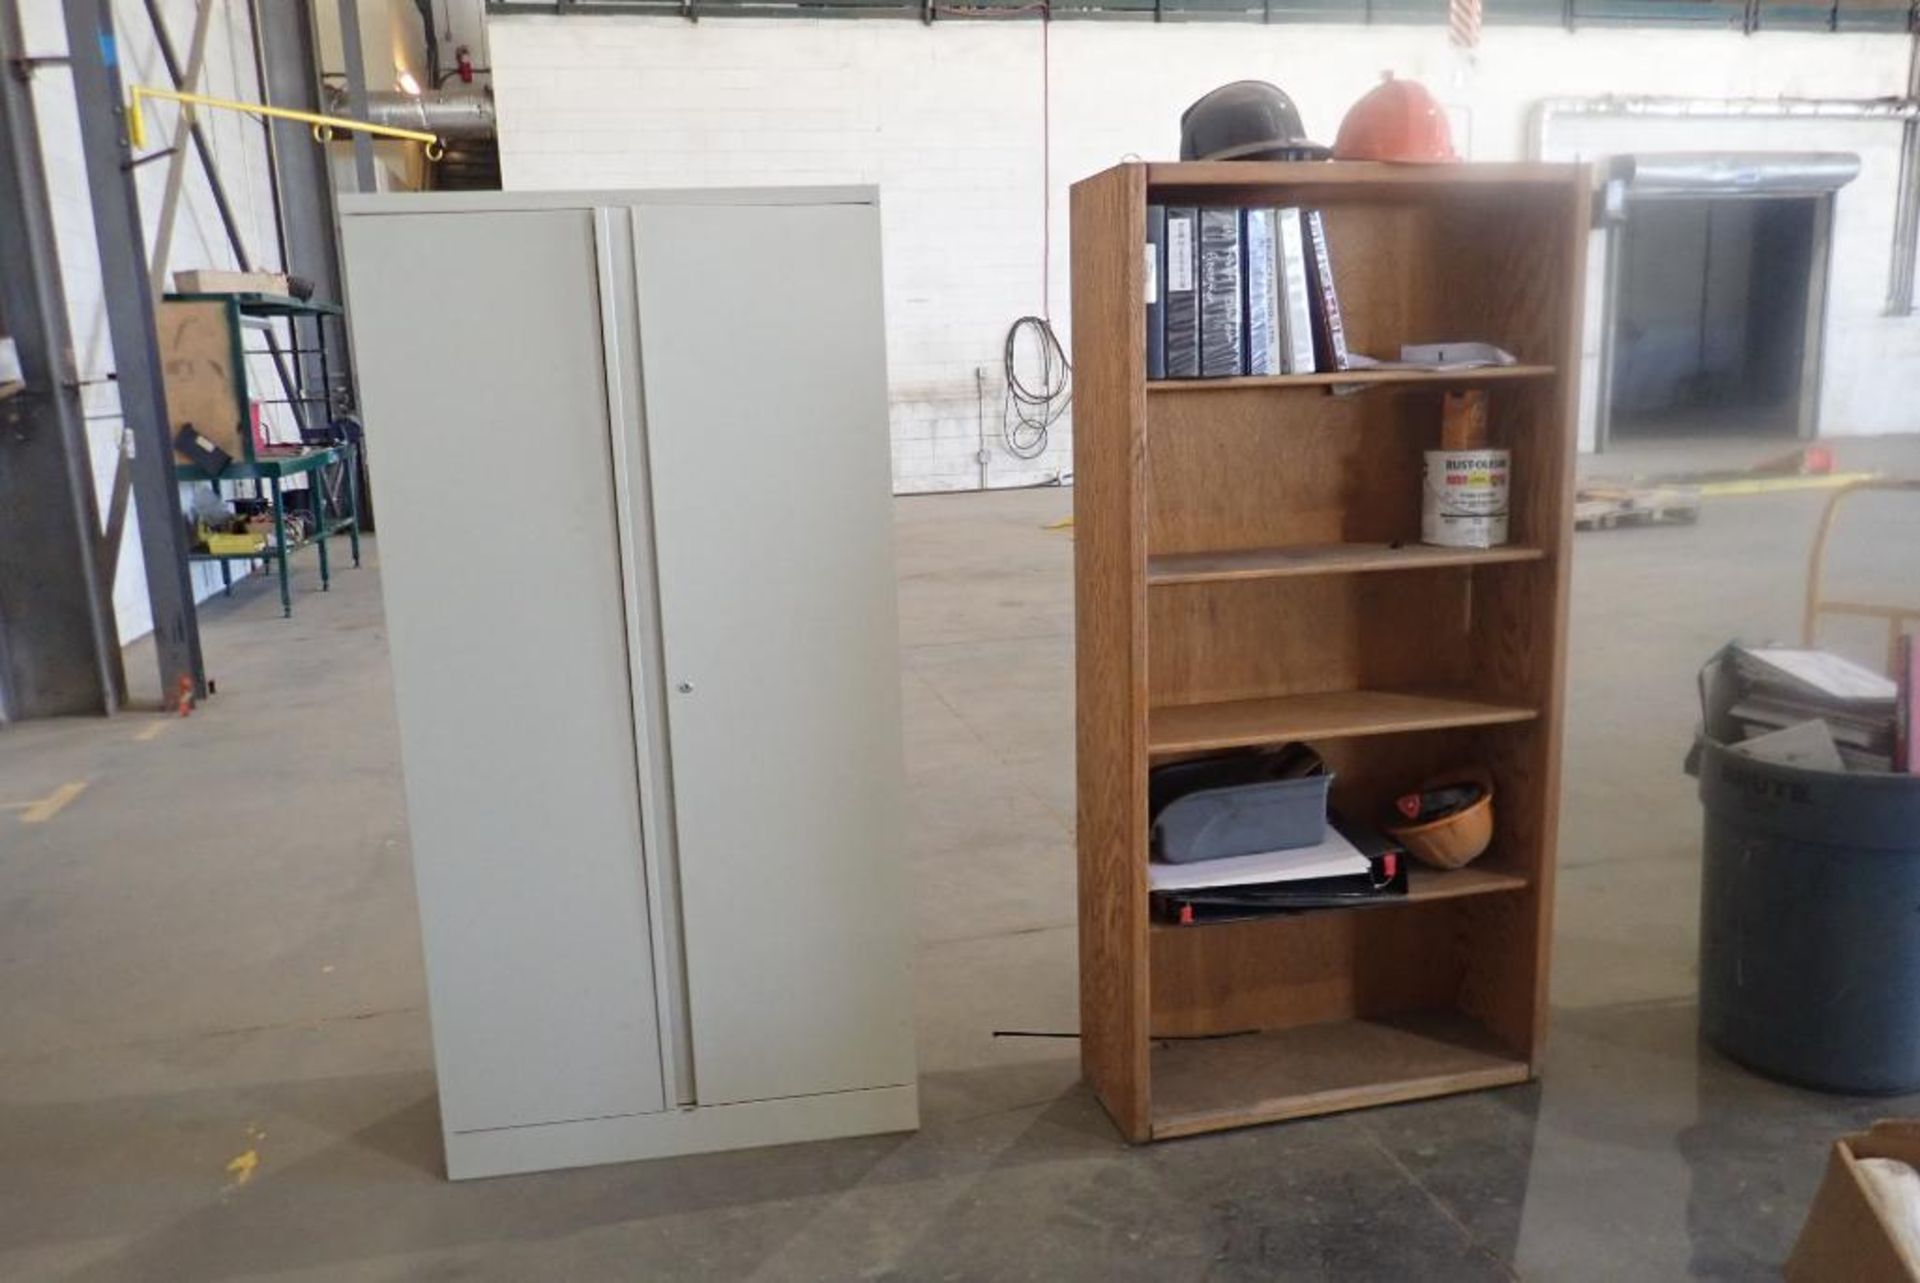 Lot of Metal Storage Cabinet and Wooden Shelving Unit.